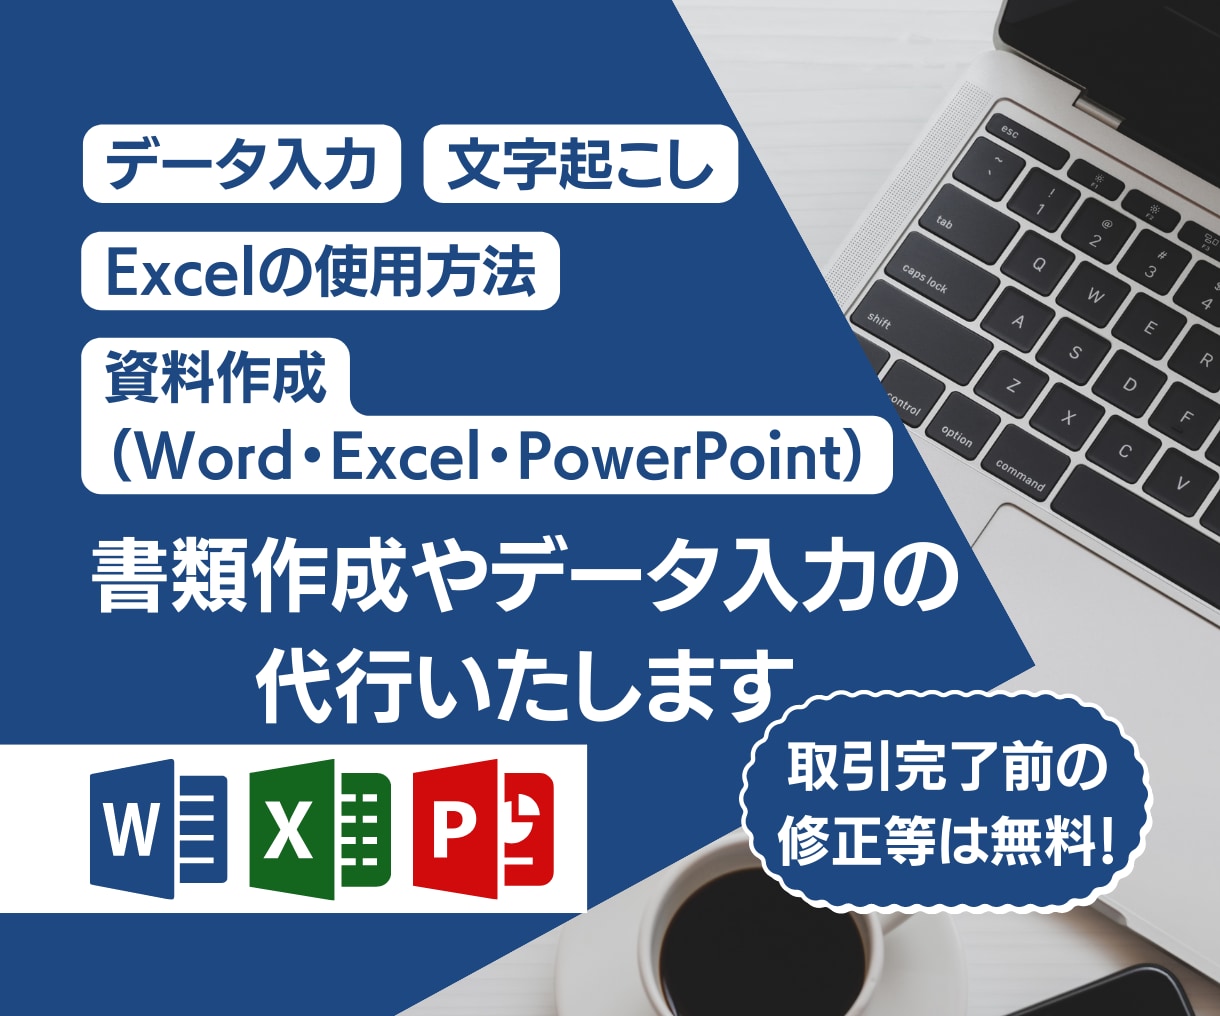 💬Coconara｜Input work in Word/Excel and create beautiful tables Mandaring Support 5.0…